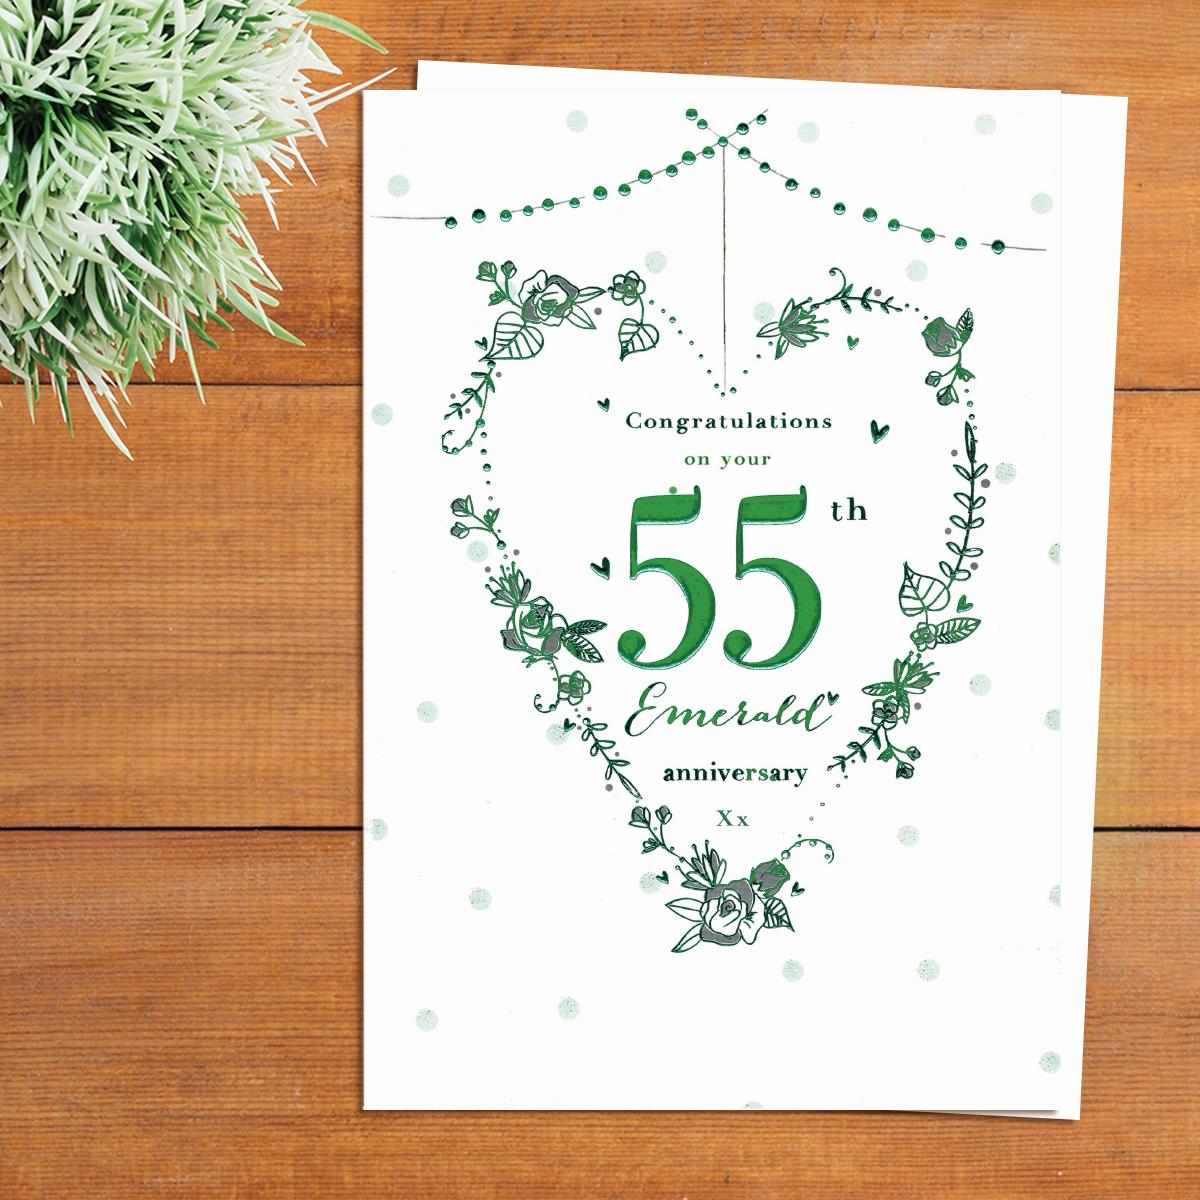 On Your Emerald(55th) Anniversary Card Front Image